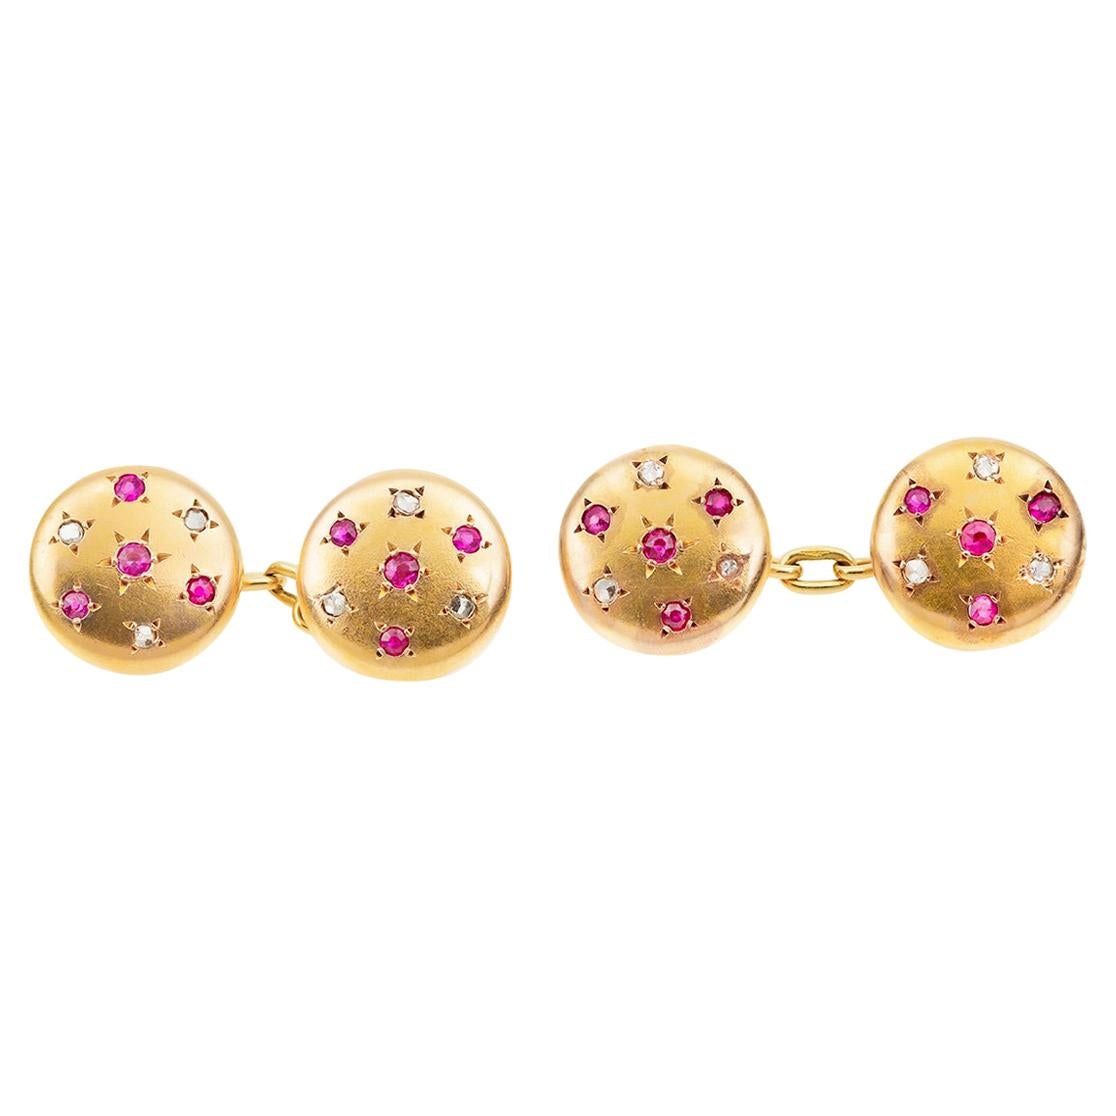 18 Carat Gold Cufflinks with Rubies and Diamonds in a Star Setting, English 1890